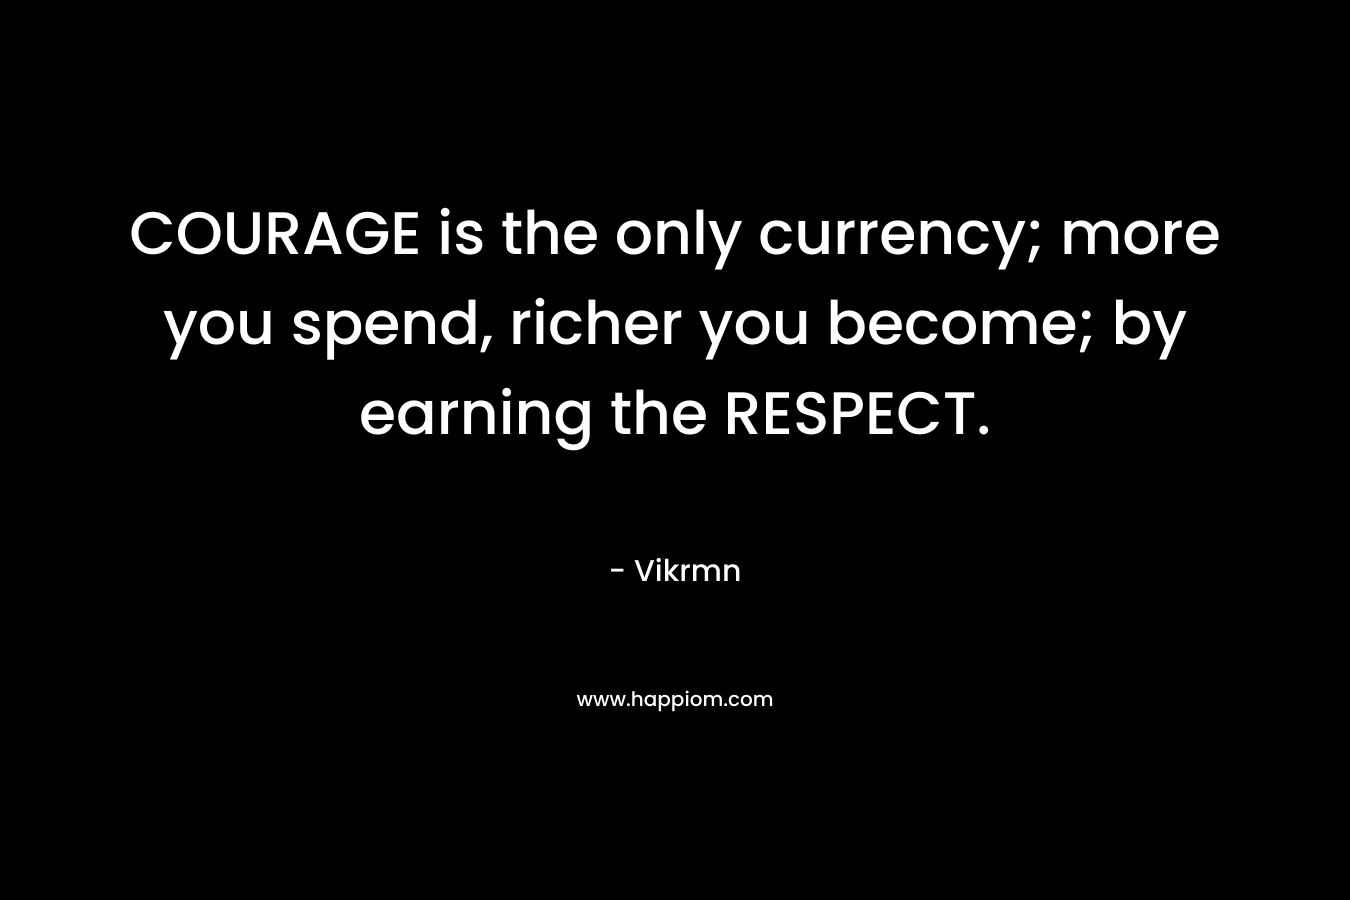 COURAGE is the only currency; more you spend, richer you become; by earning the RESPECT.